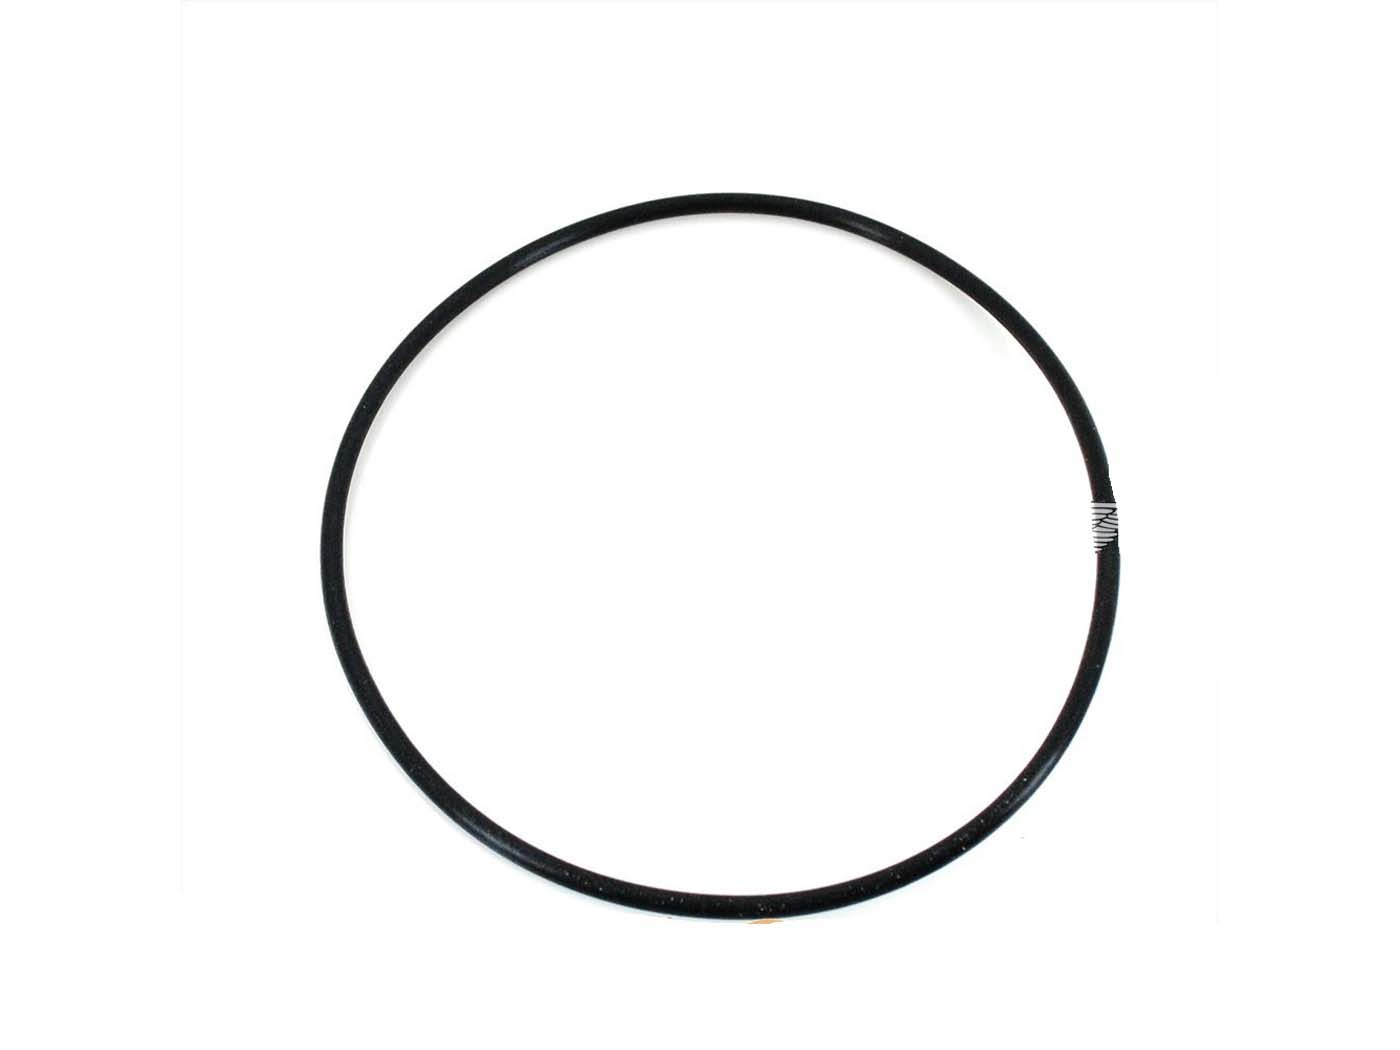 Cylinder O - Ring Gasket 124 X 3,5mm For Zündapp KS 50 WC LC